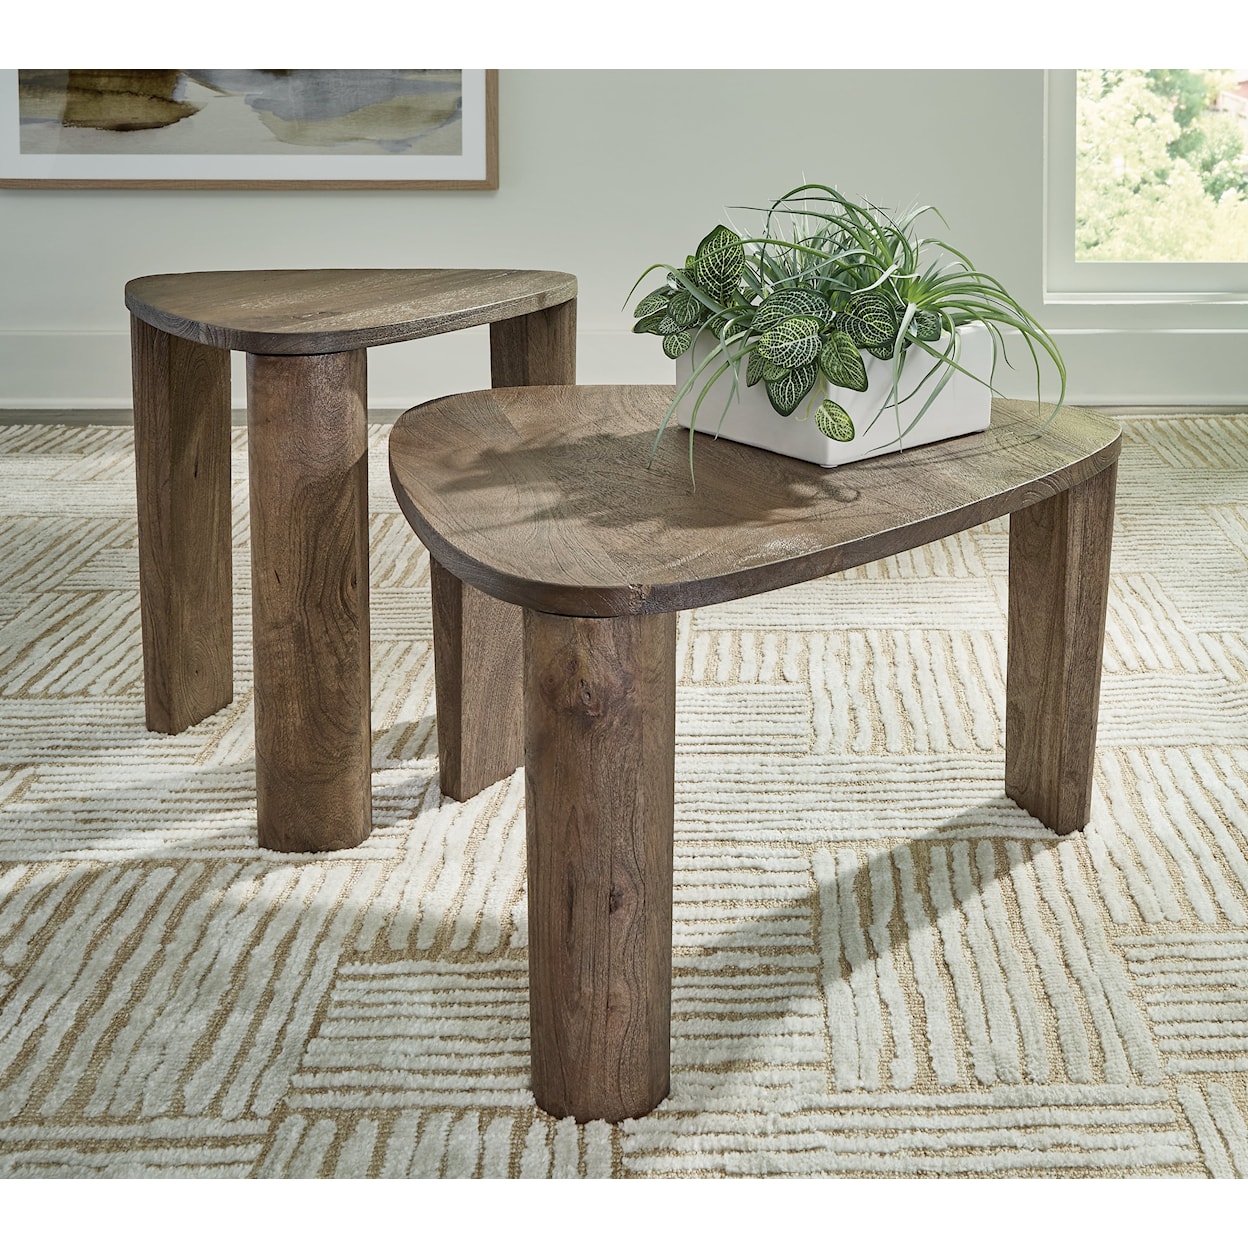 Signature Design by Ashley Reidport Accent Coffee Table (Set Of 2)